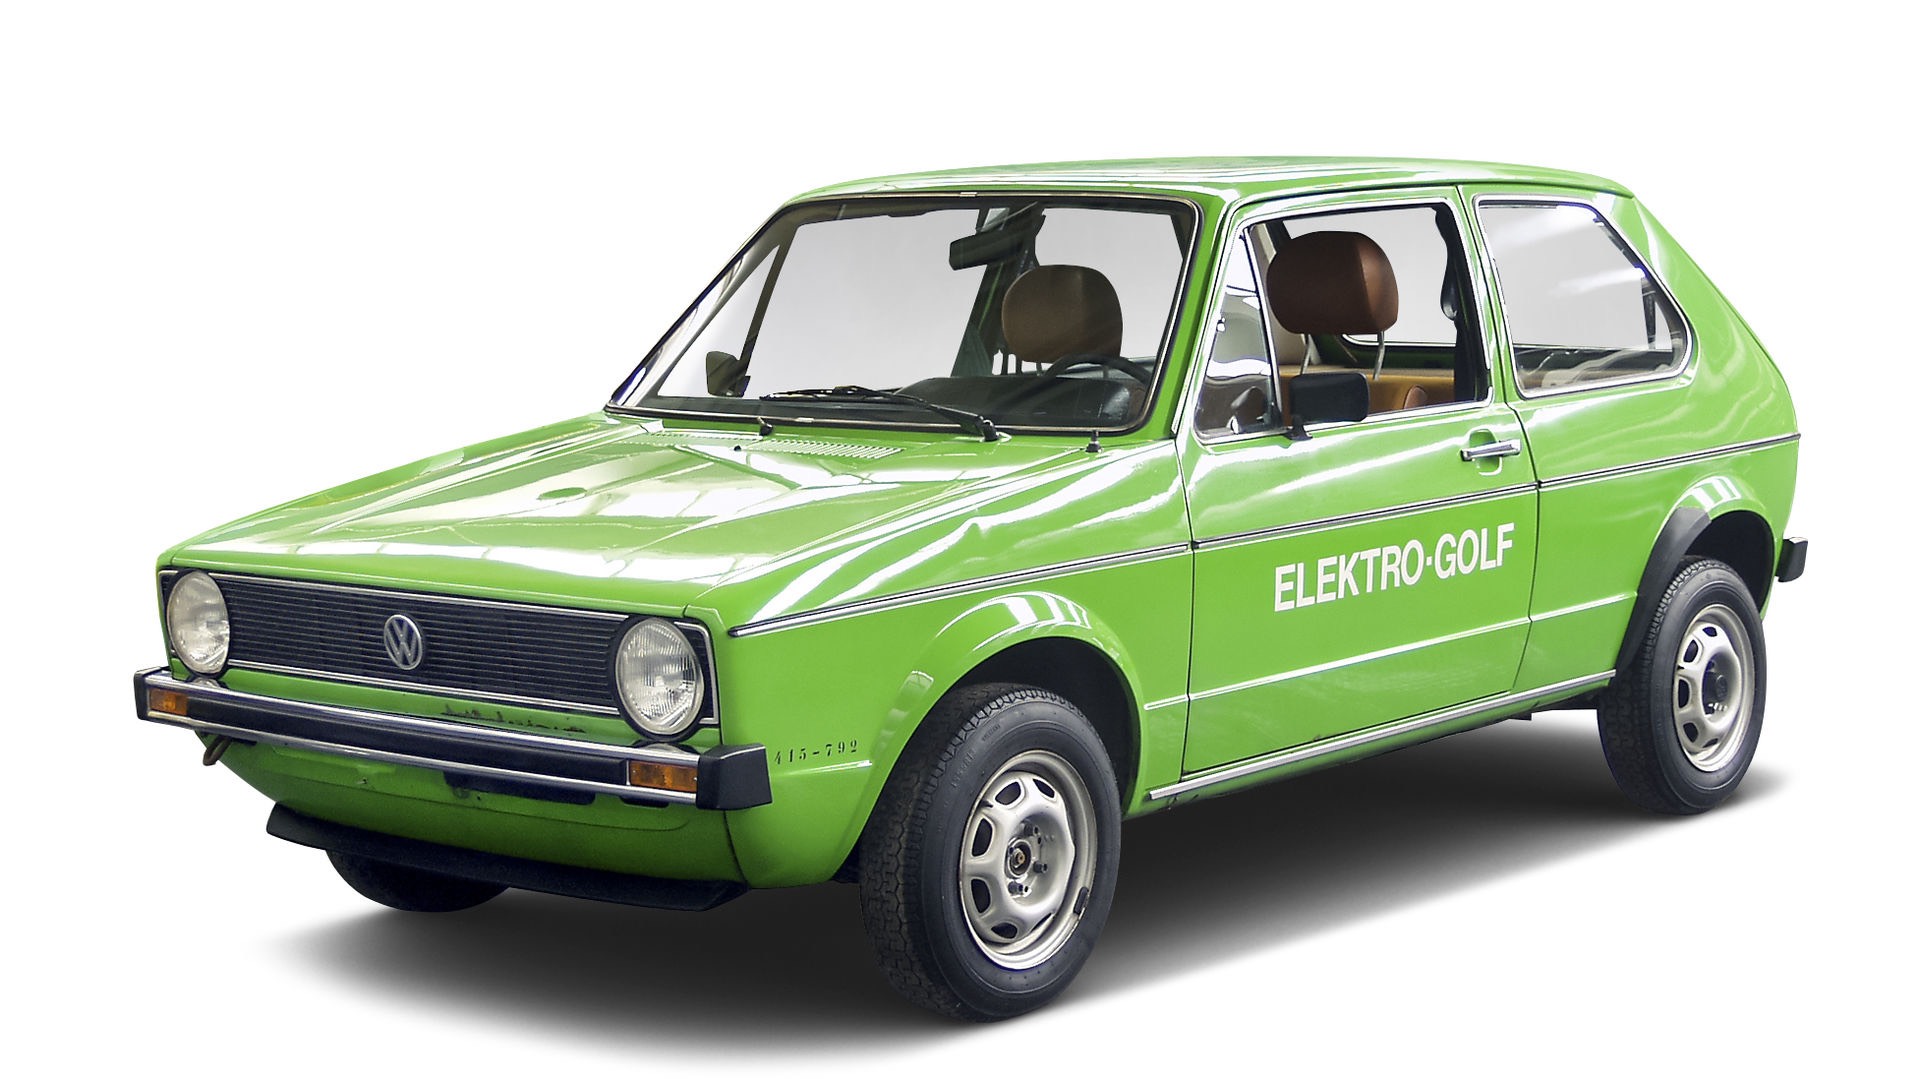 The Volkswagen Elektro-Golf: an Electric Car from 1976